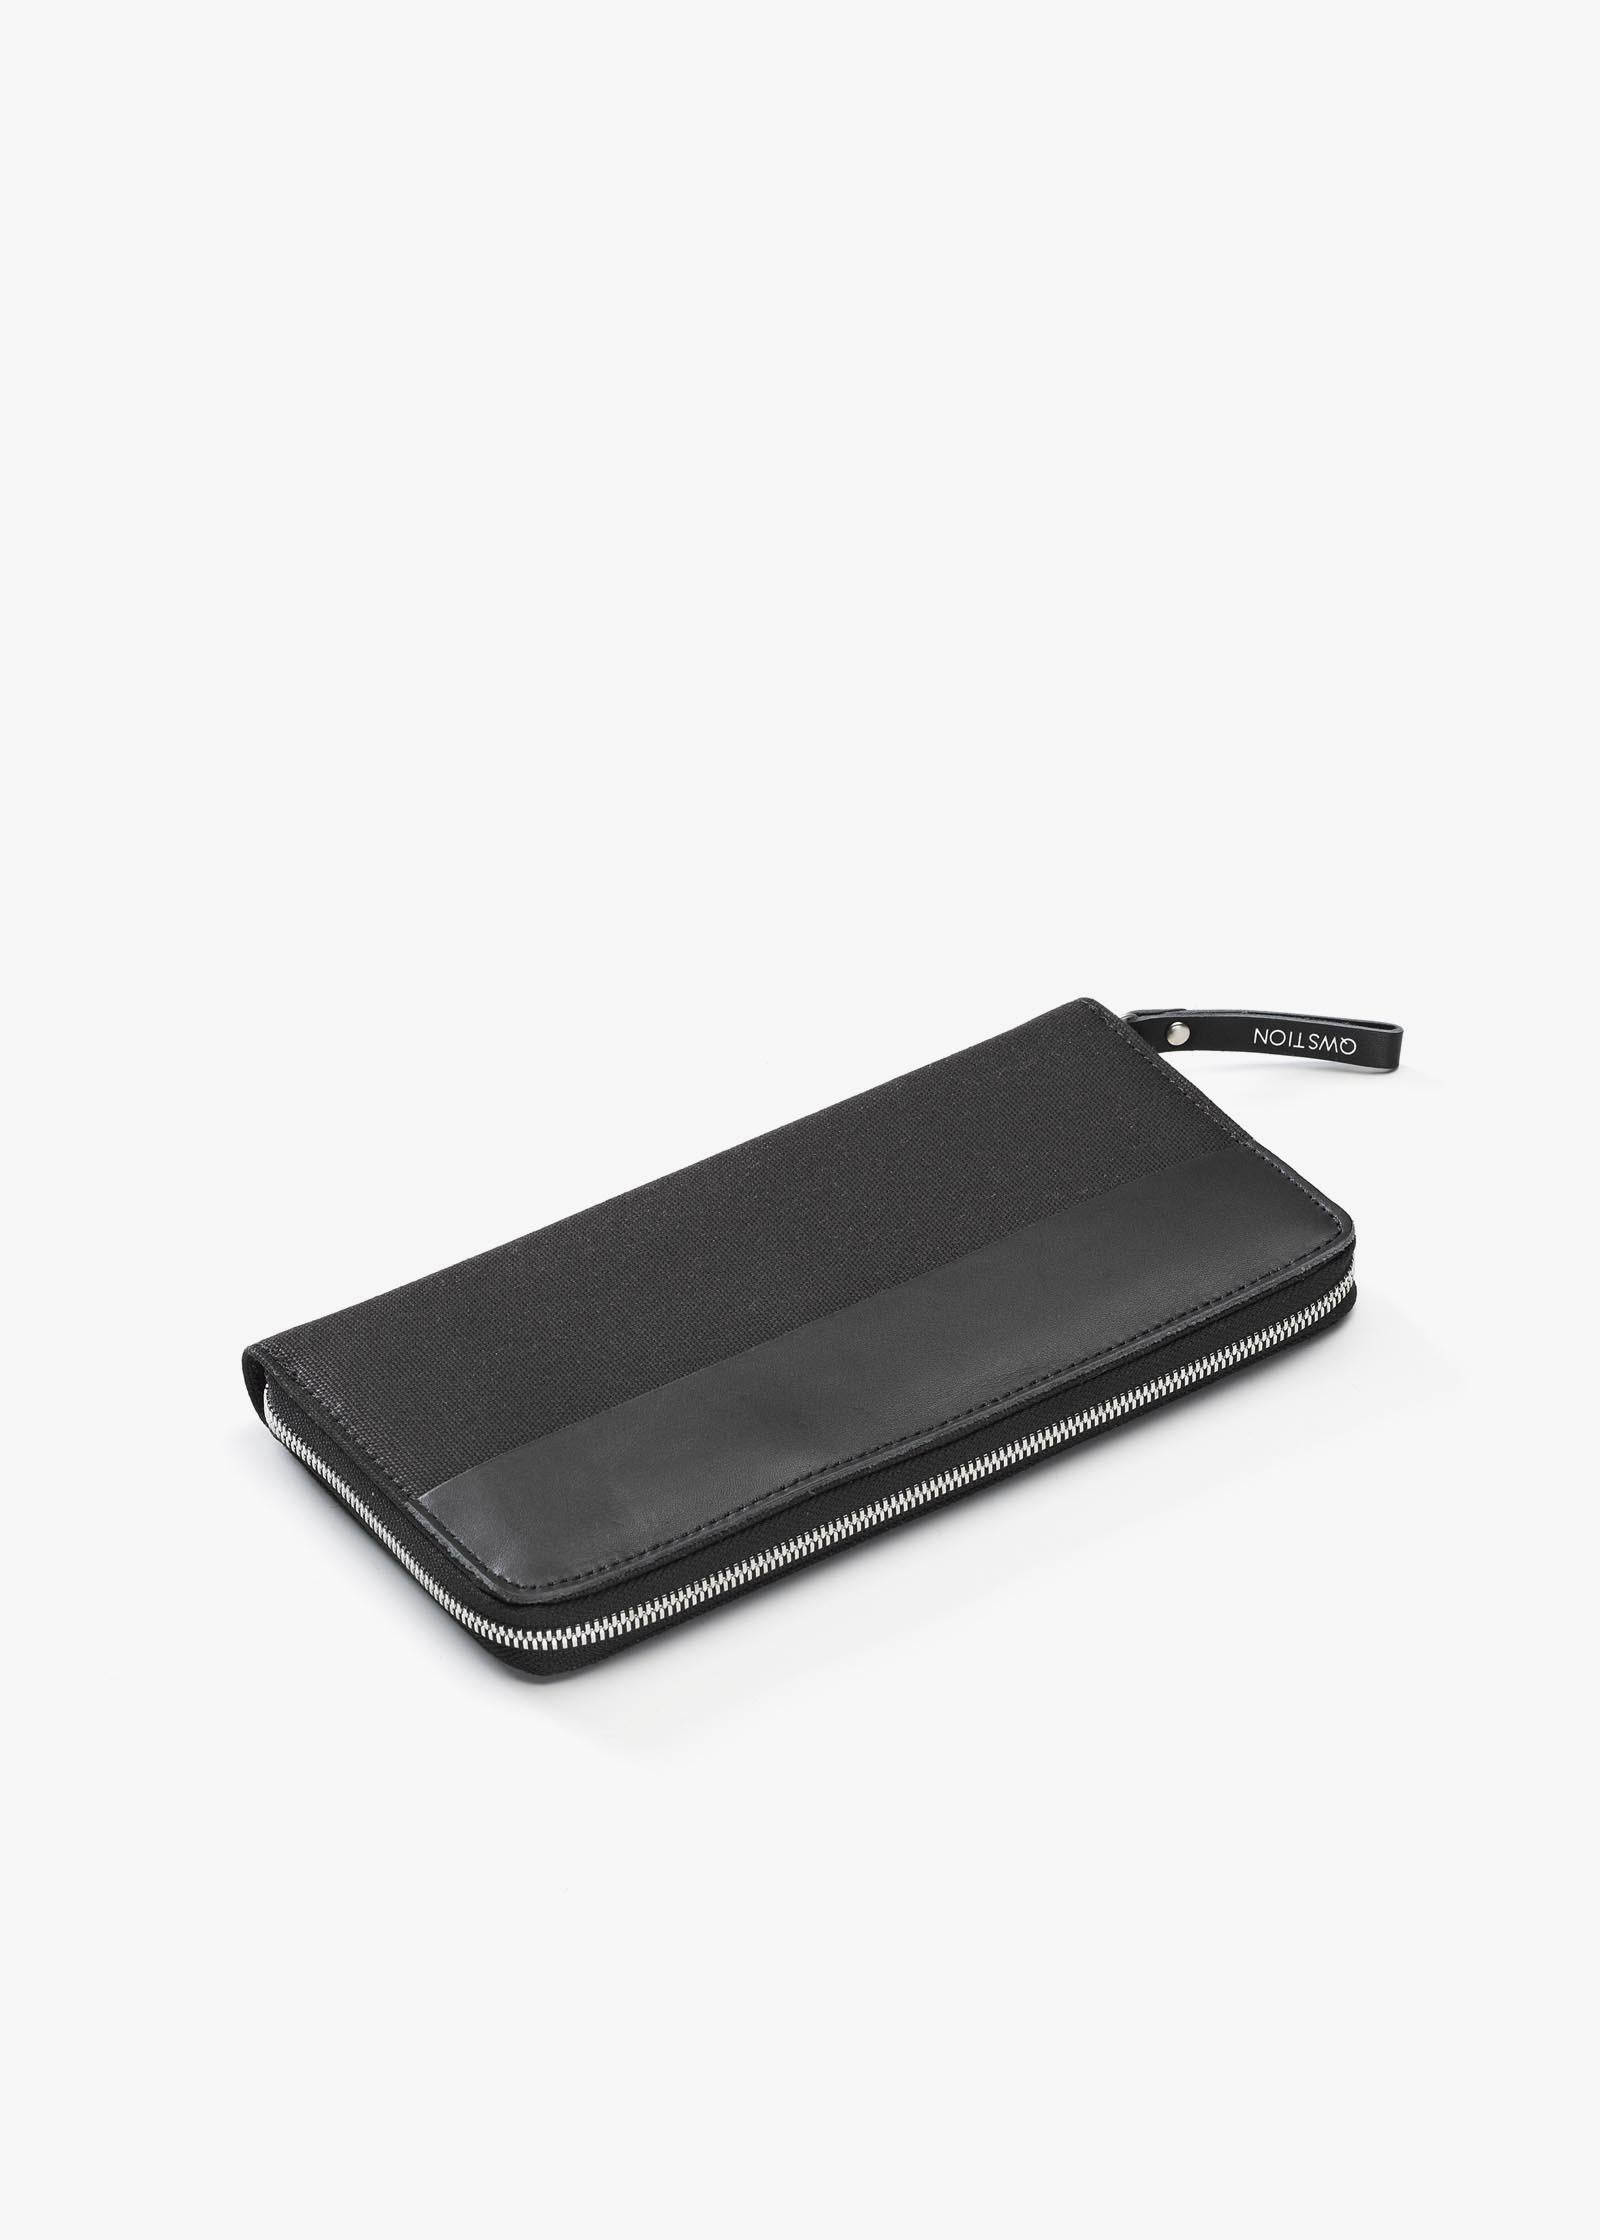 Travel Wallet – Black Leather Canvas